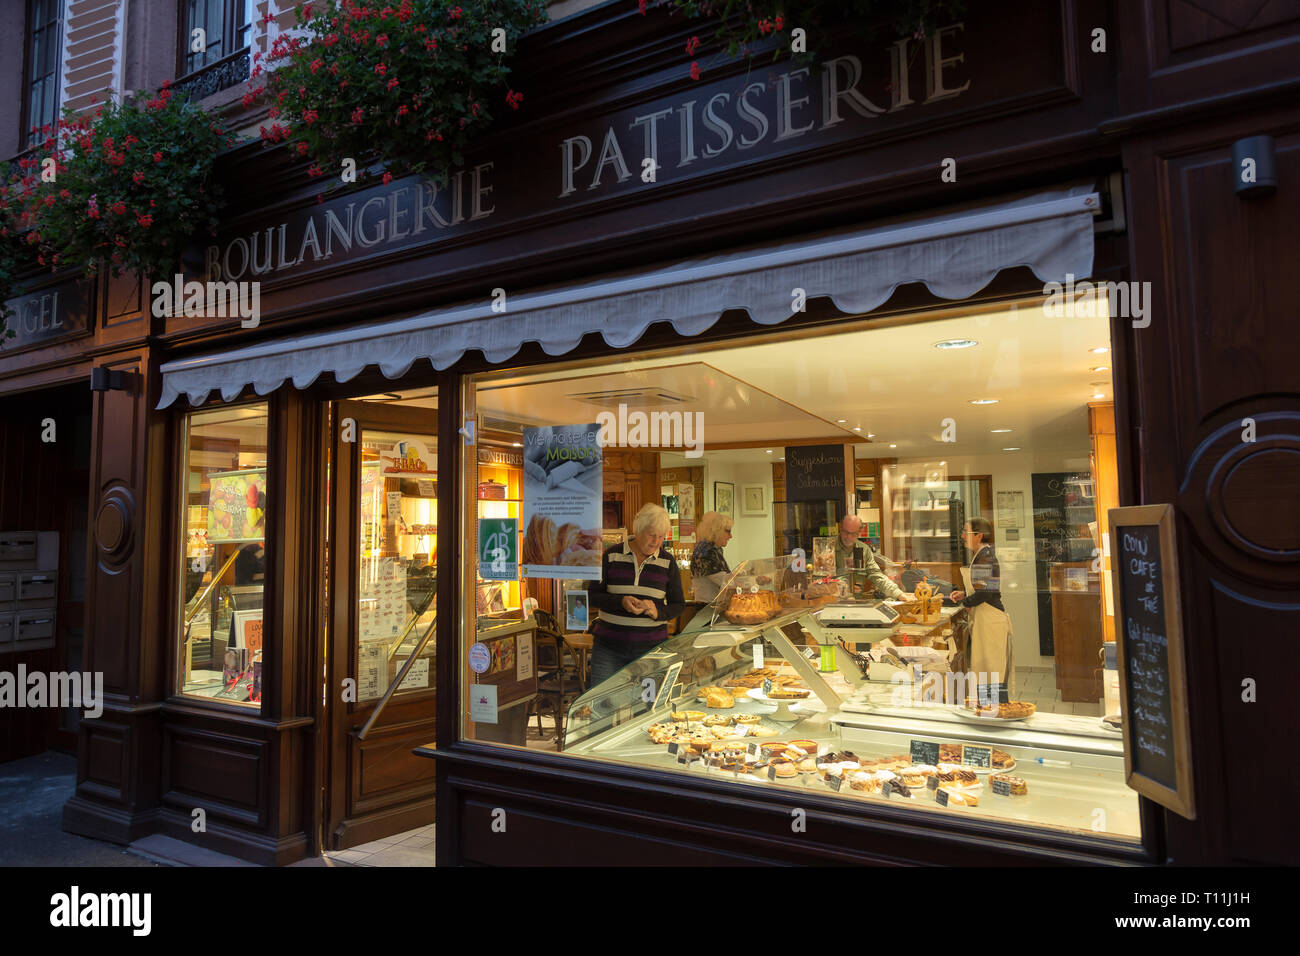 29.10.2014, Ribeauville, Grand Est, France - Bakery (Boulangerie patisserie) in Alsace. Ribeauville is a charming place on the wine road in the Vosges Stock Photo